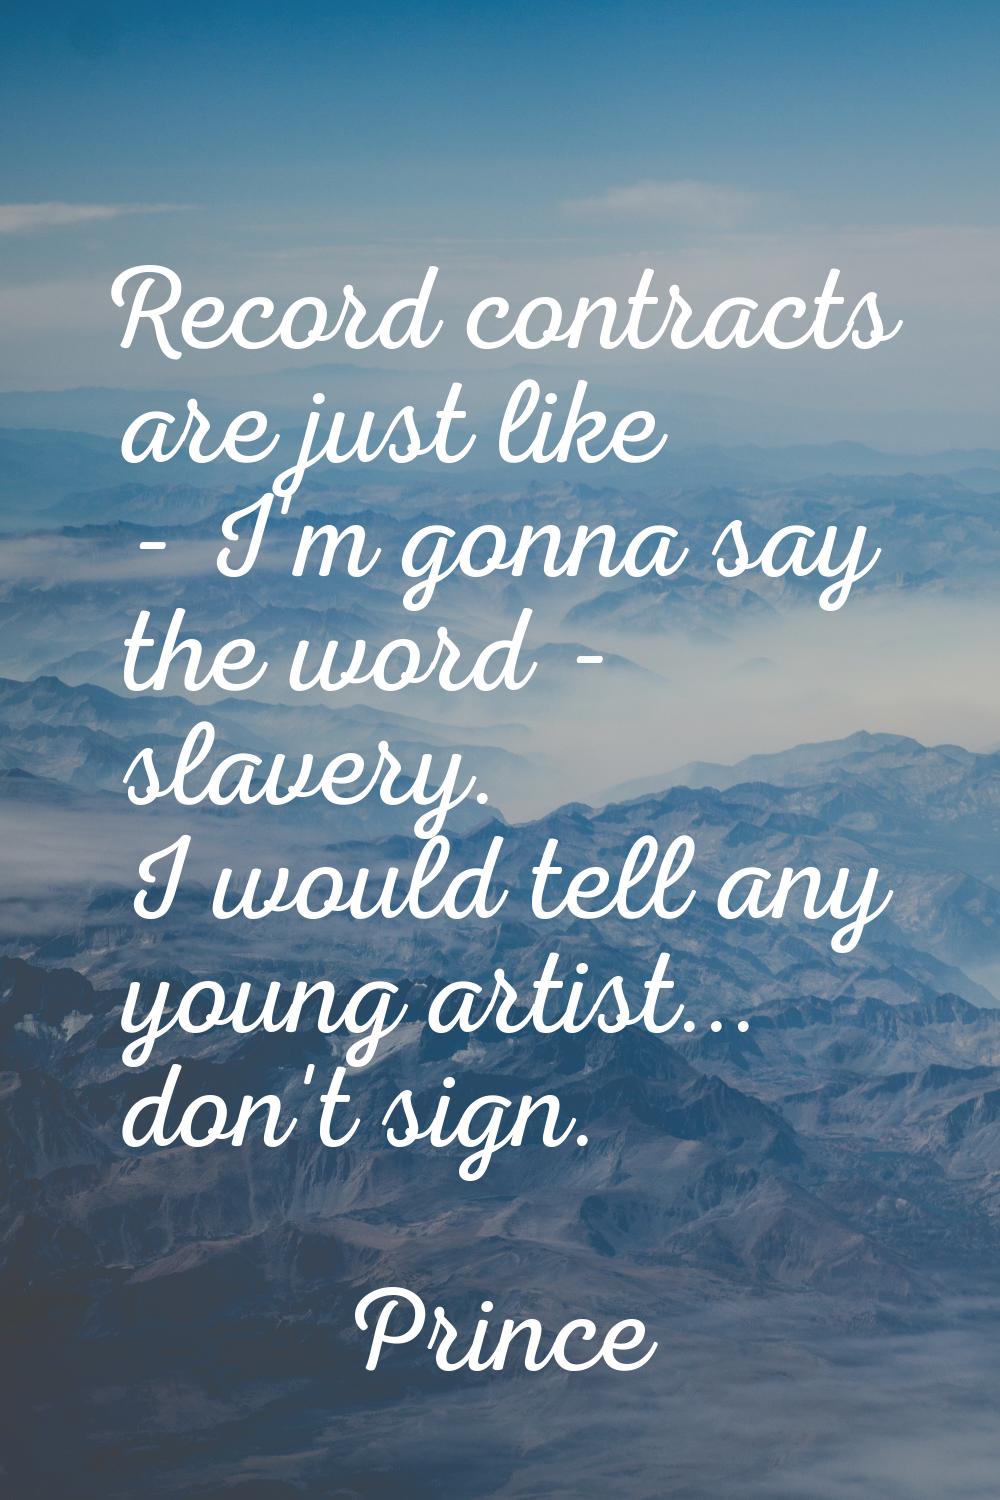 Record contracts are just like - I'm gonna say the word - slavery. I would tell any young artist...